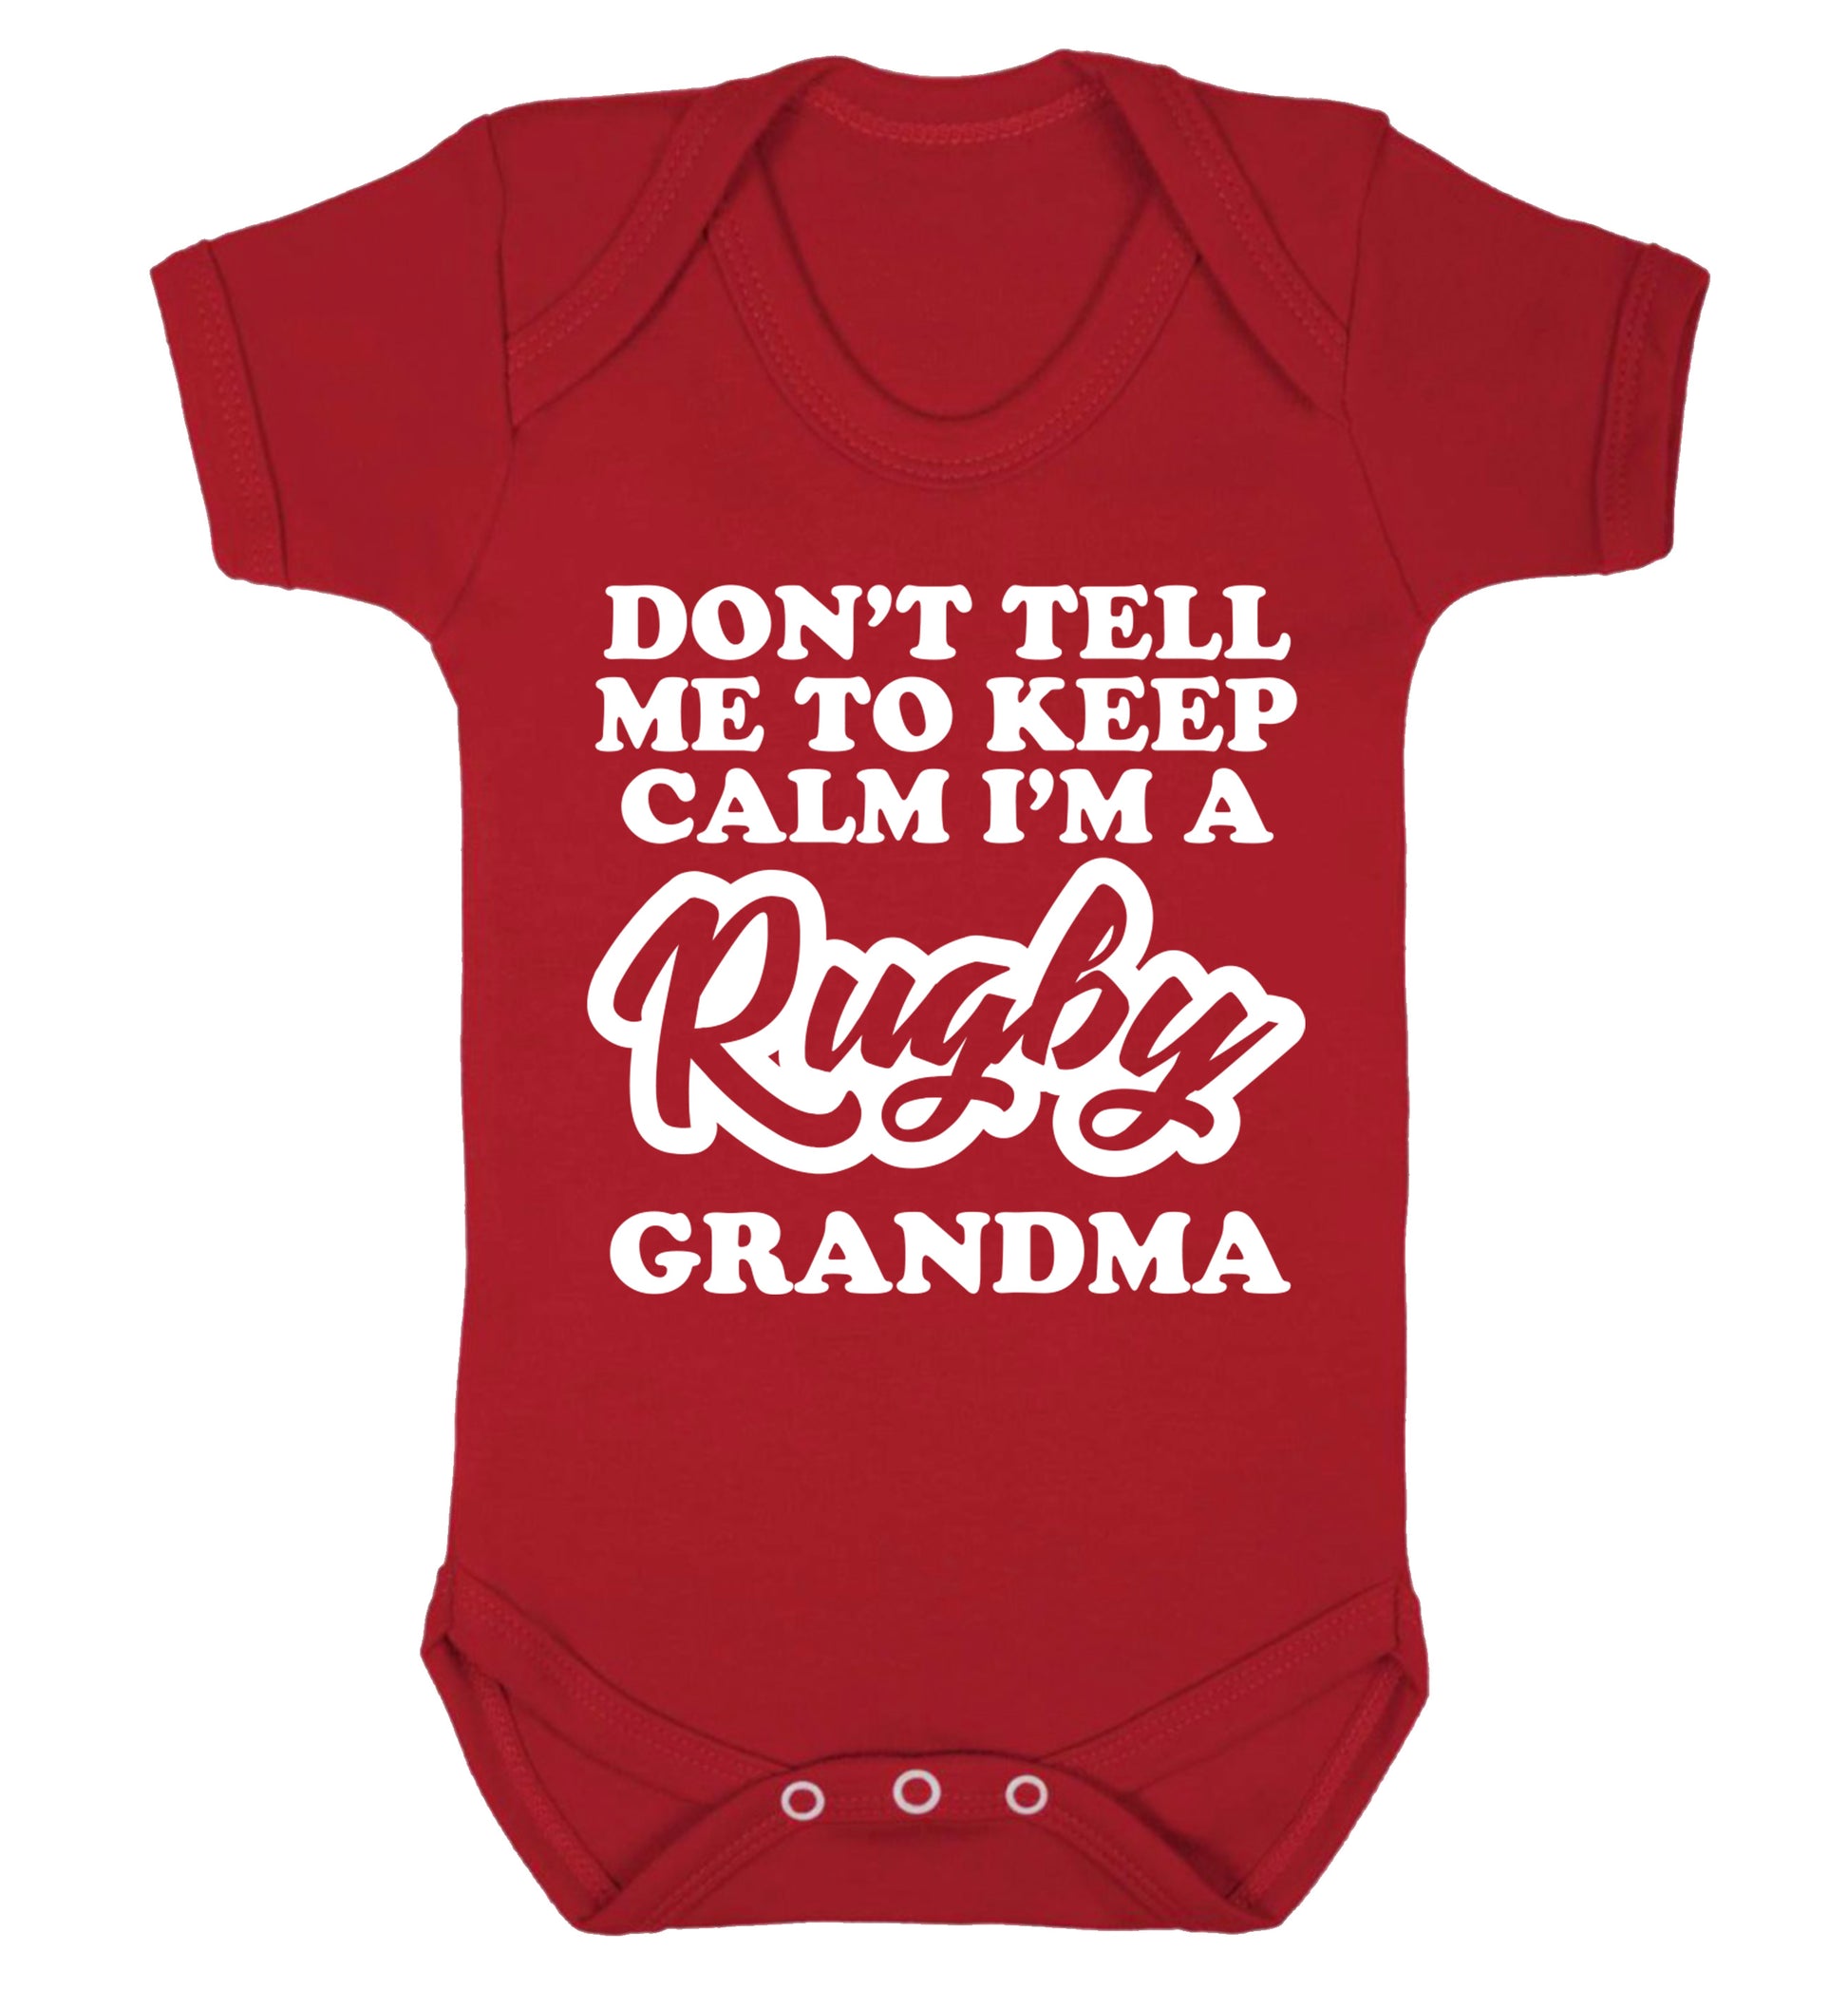 Don't tell me to keep calm I'm a rugby grandma Baby Vest red 18-24 months